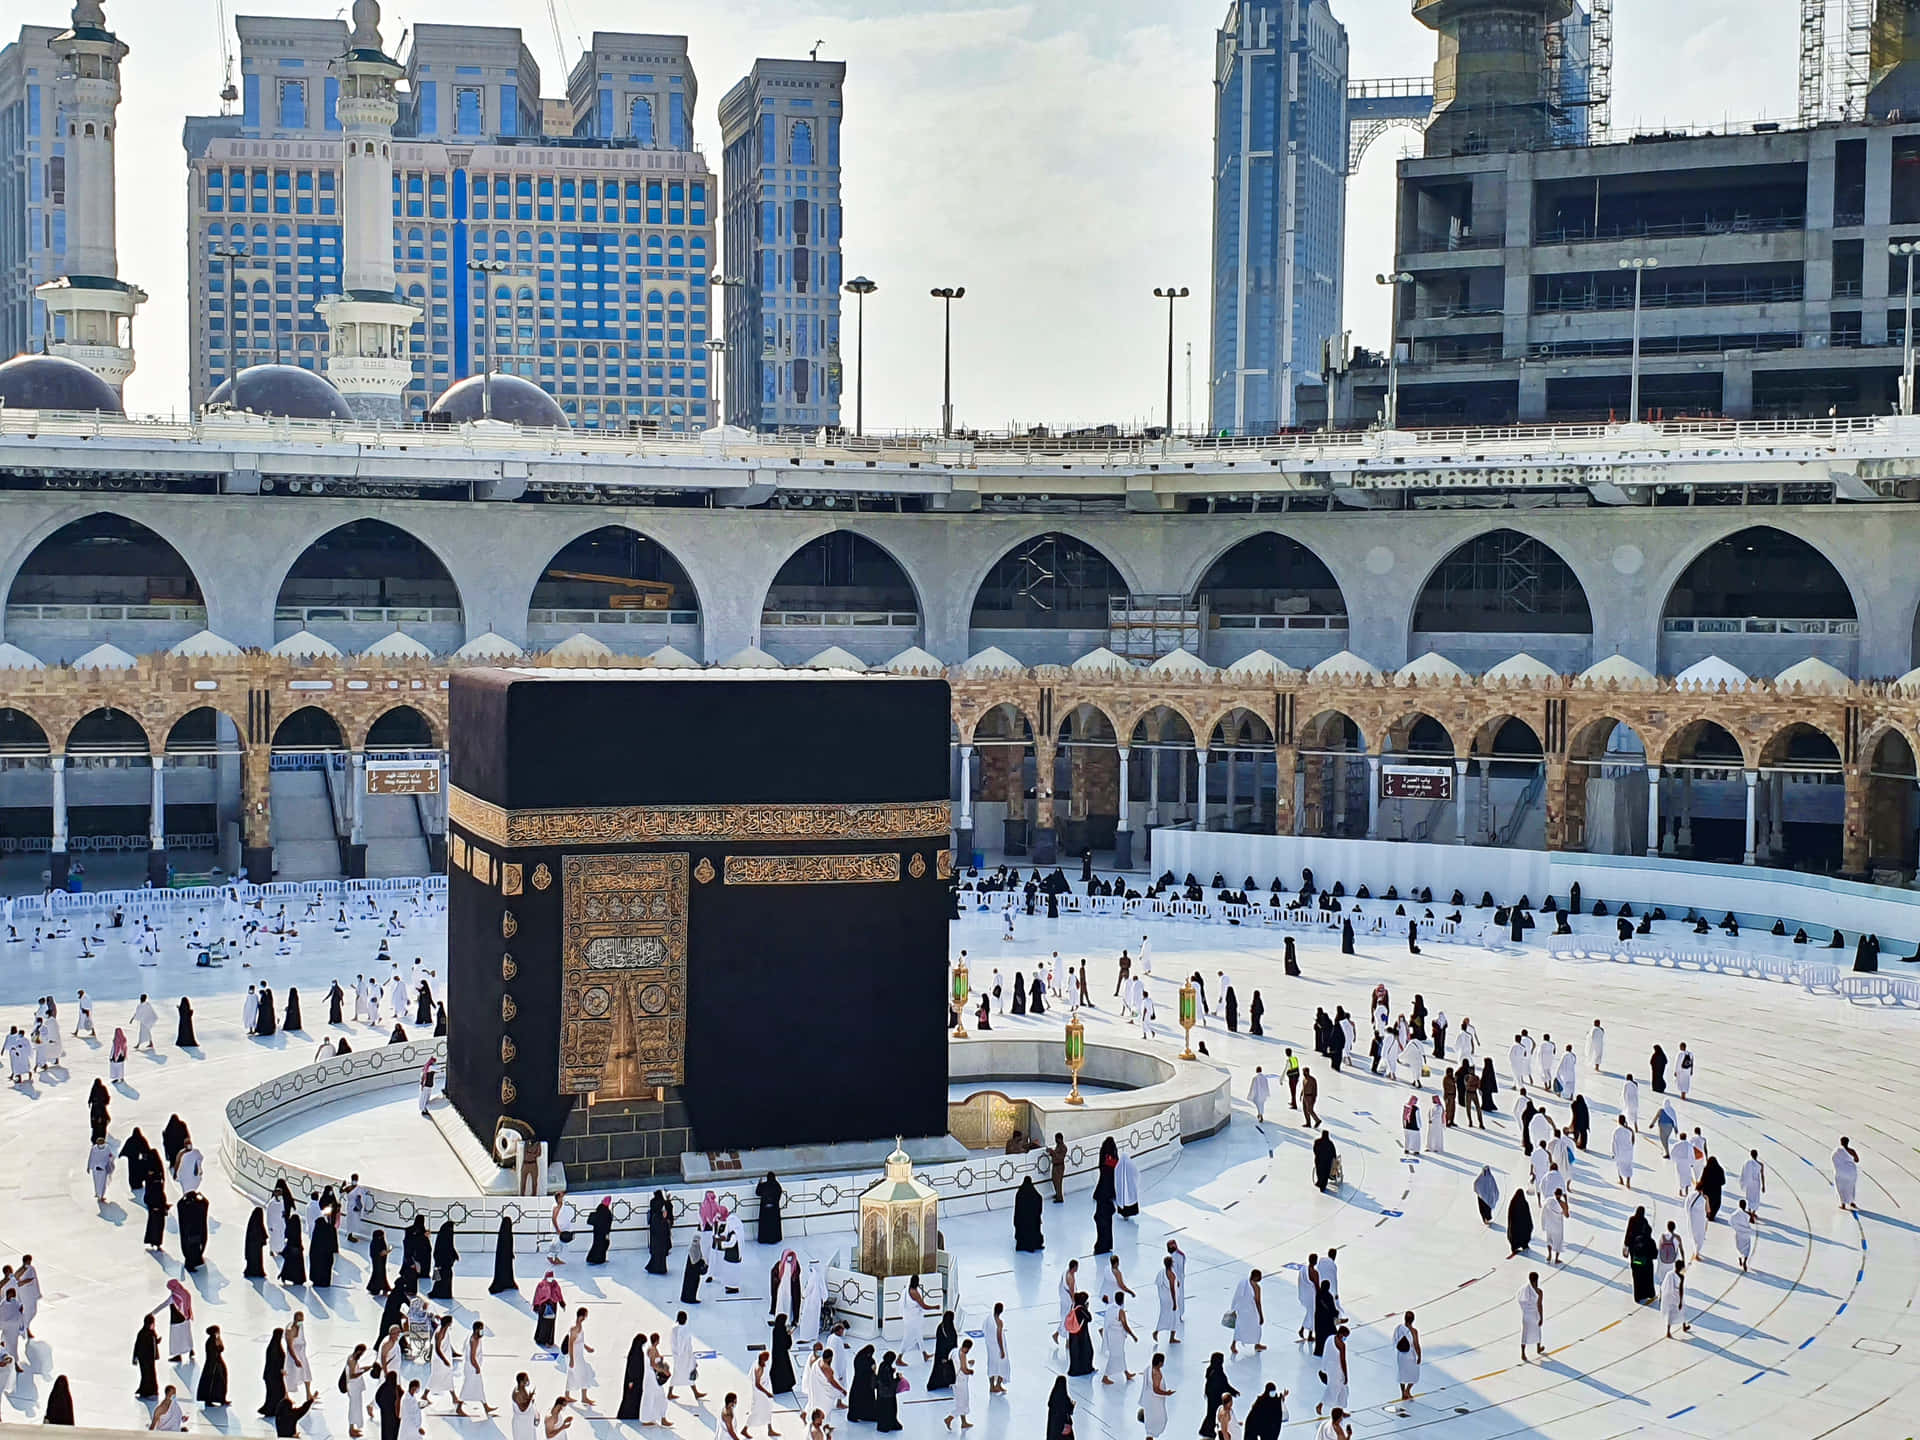 A Large Square With People Standing Around A Kaaba